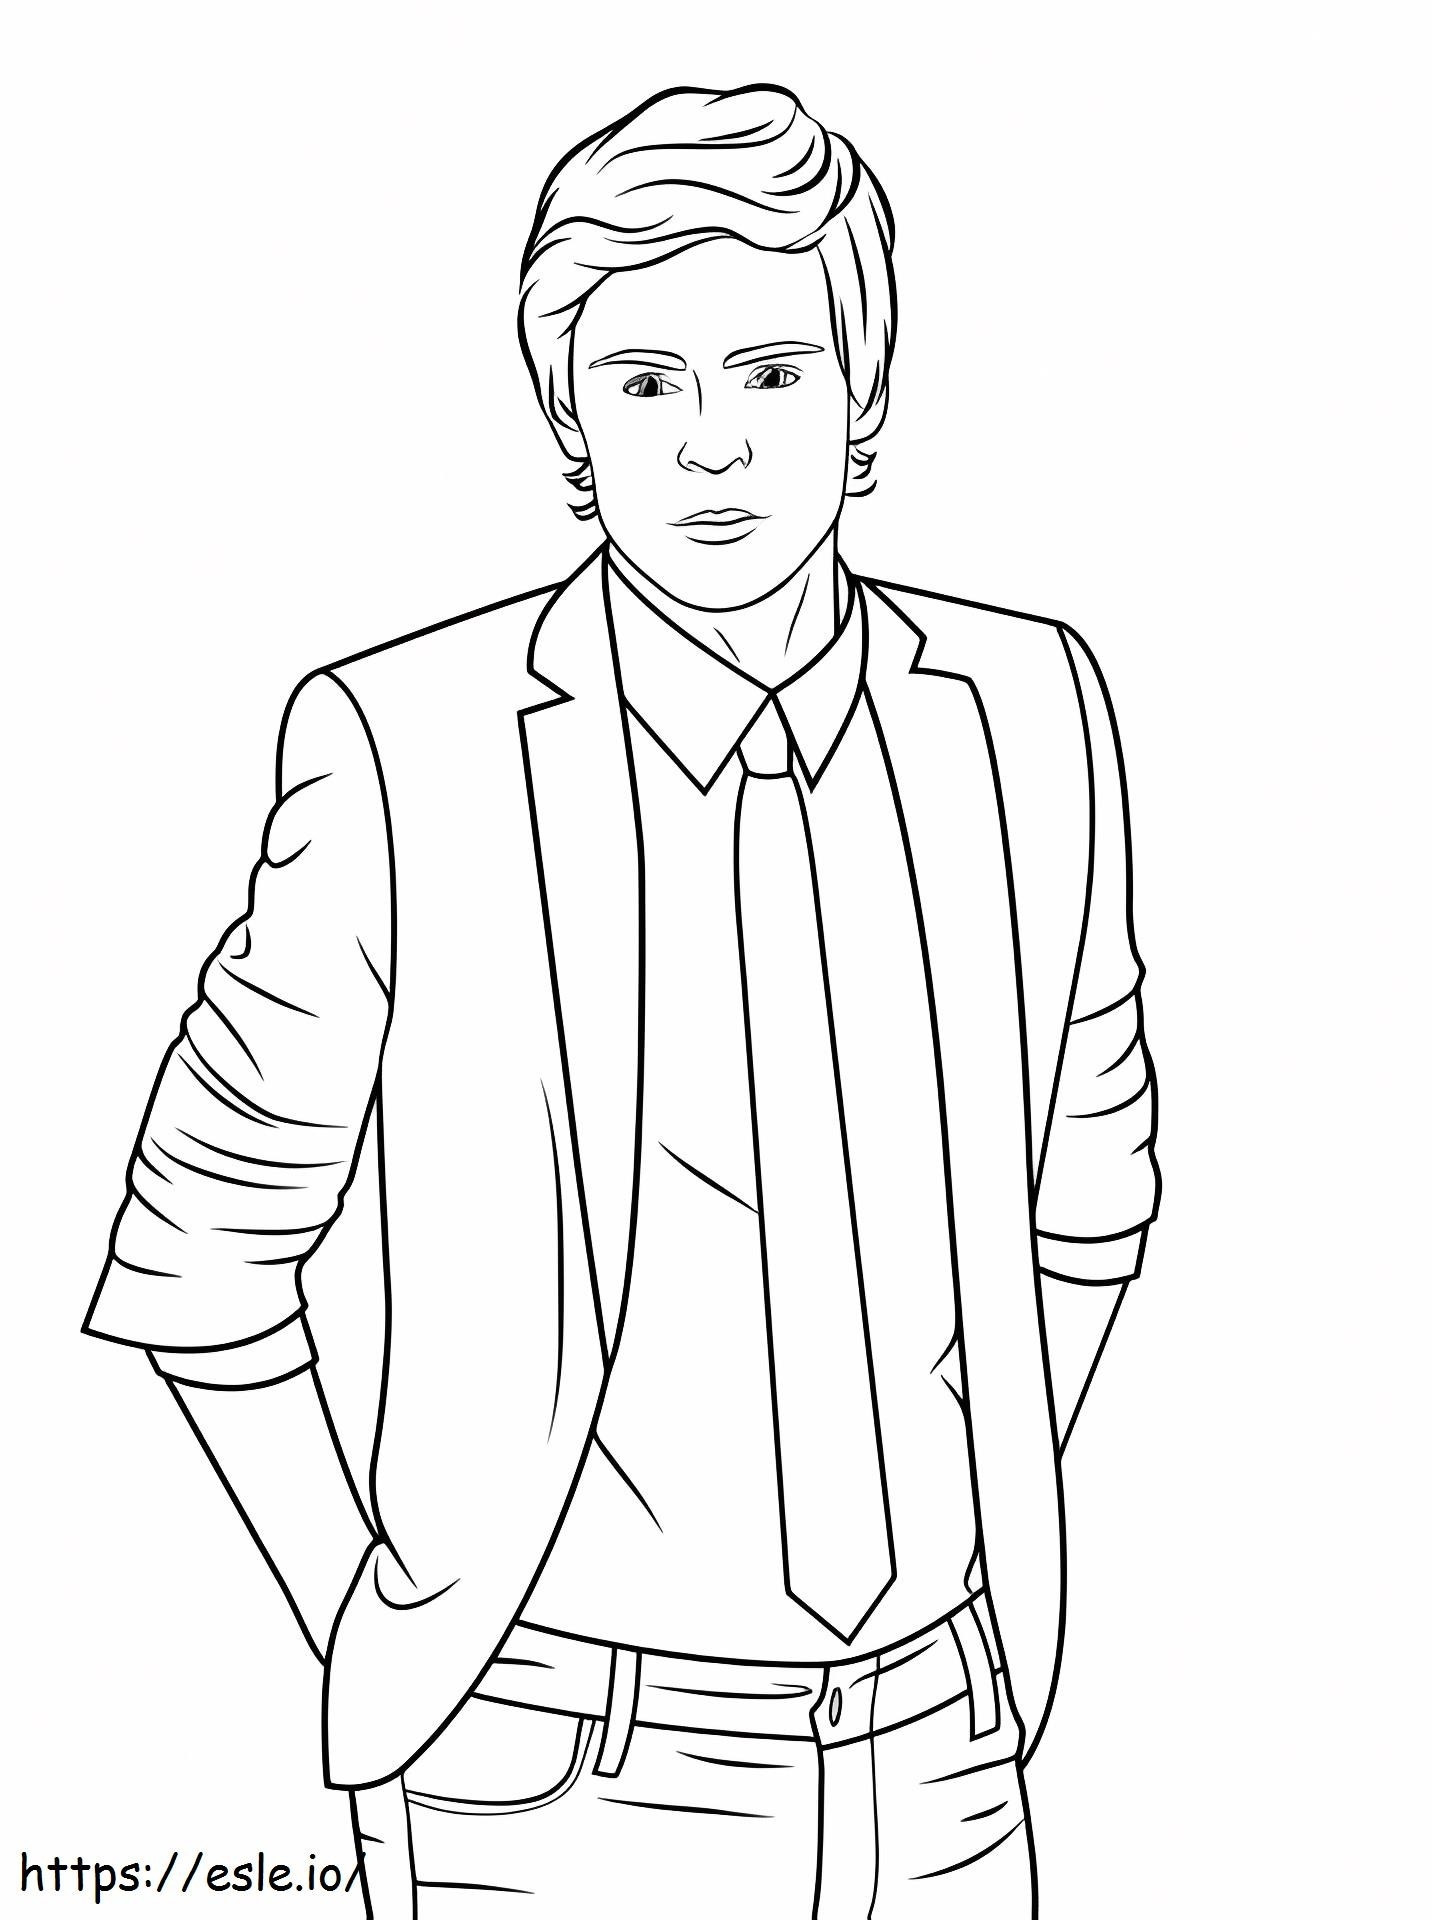 1541499924_Zac Efron coloring page